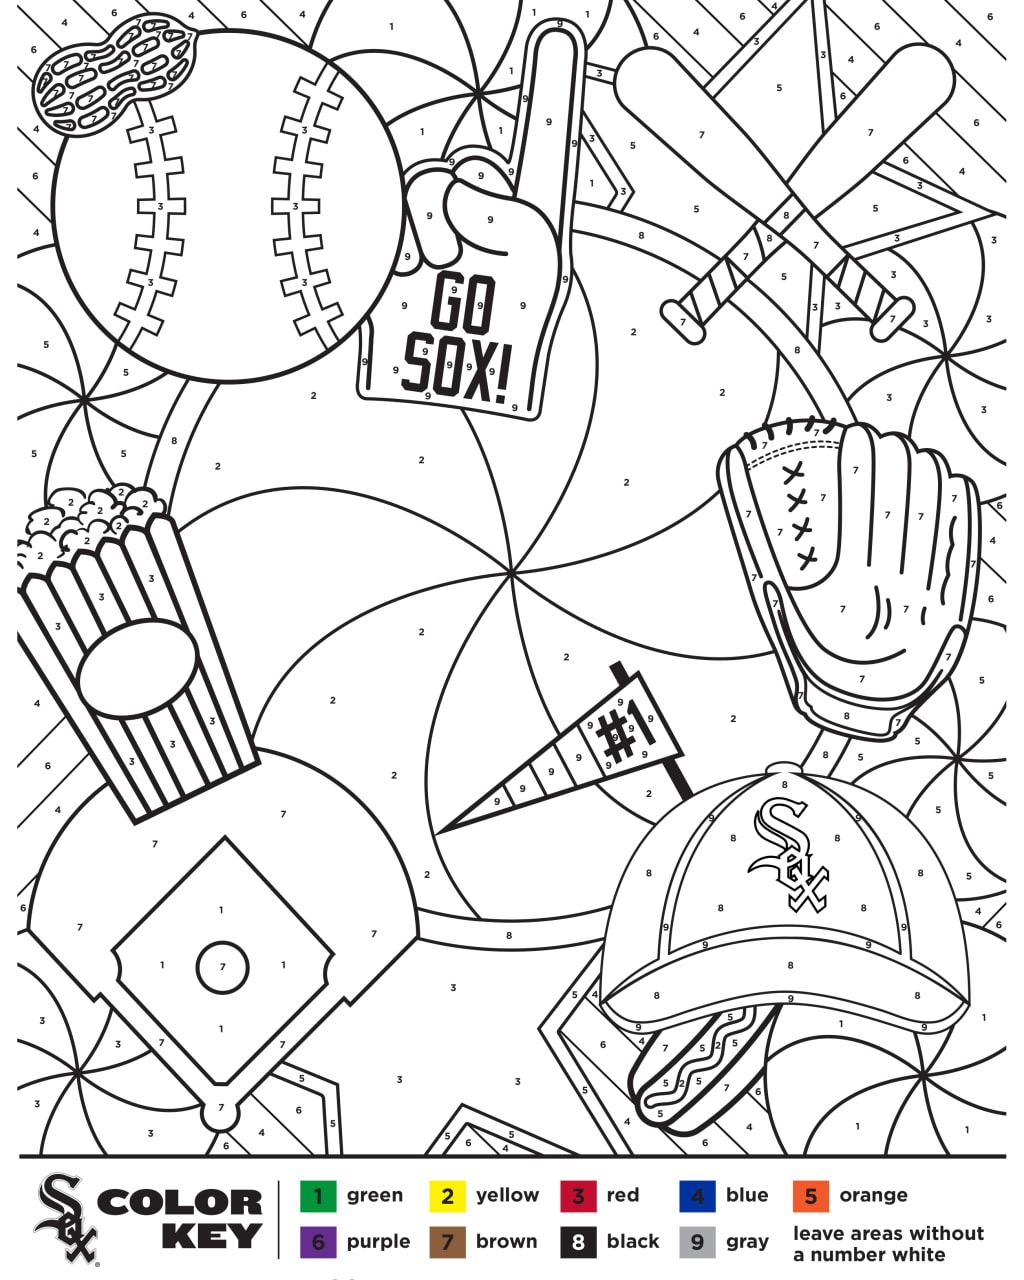 Philadelphia Phillies Logo coloring page - Download, Print or